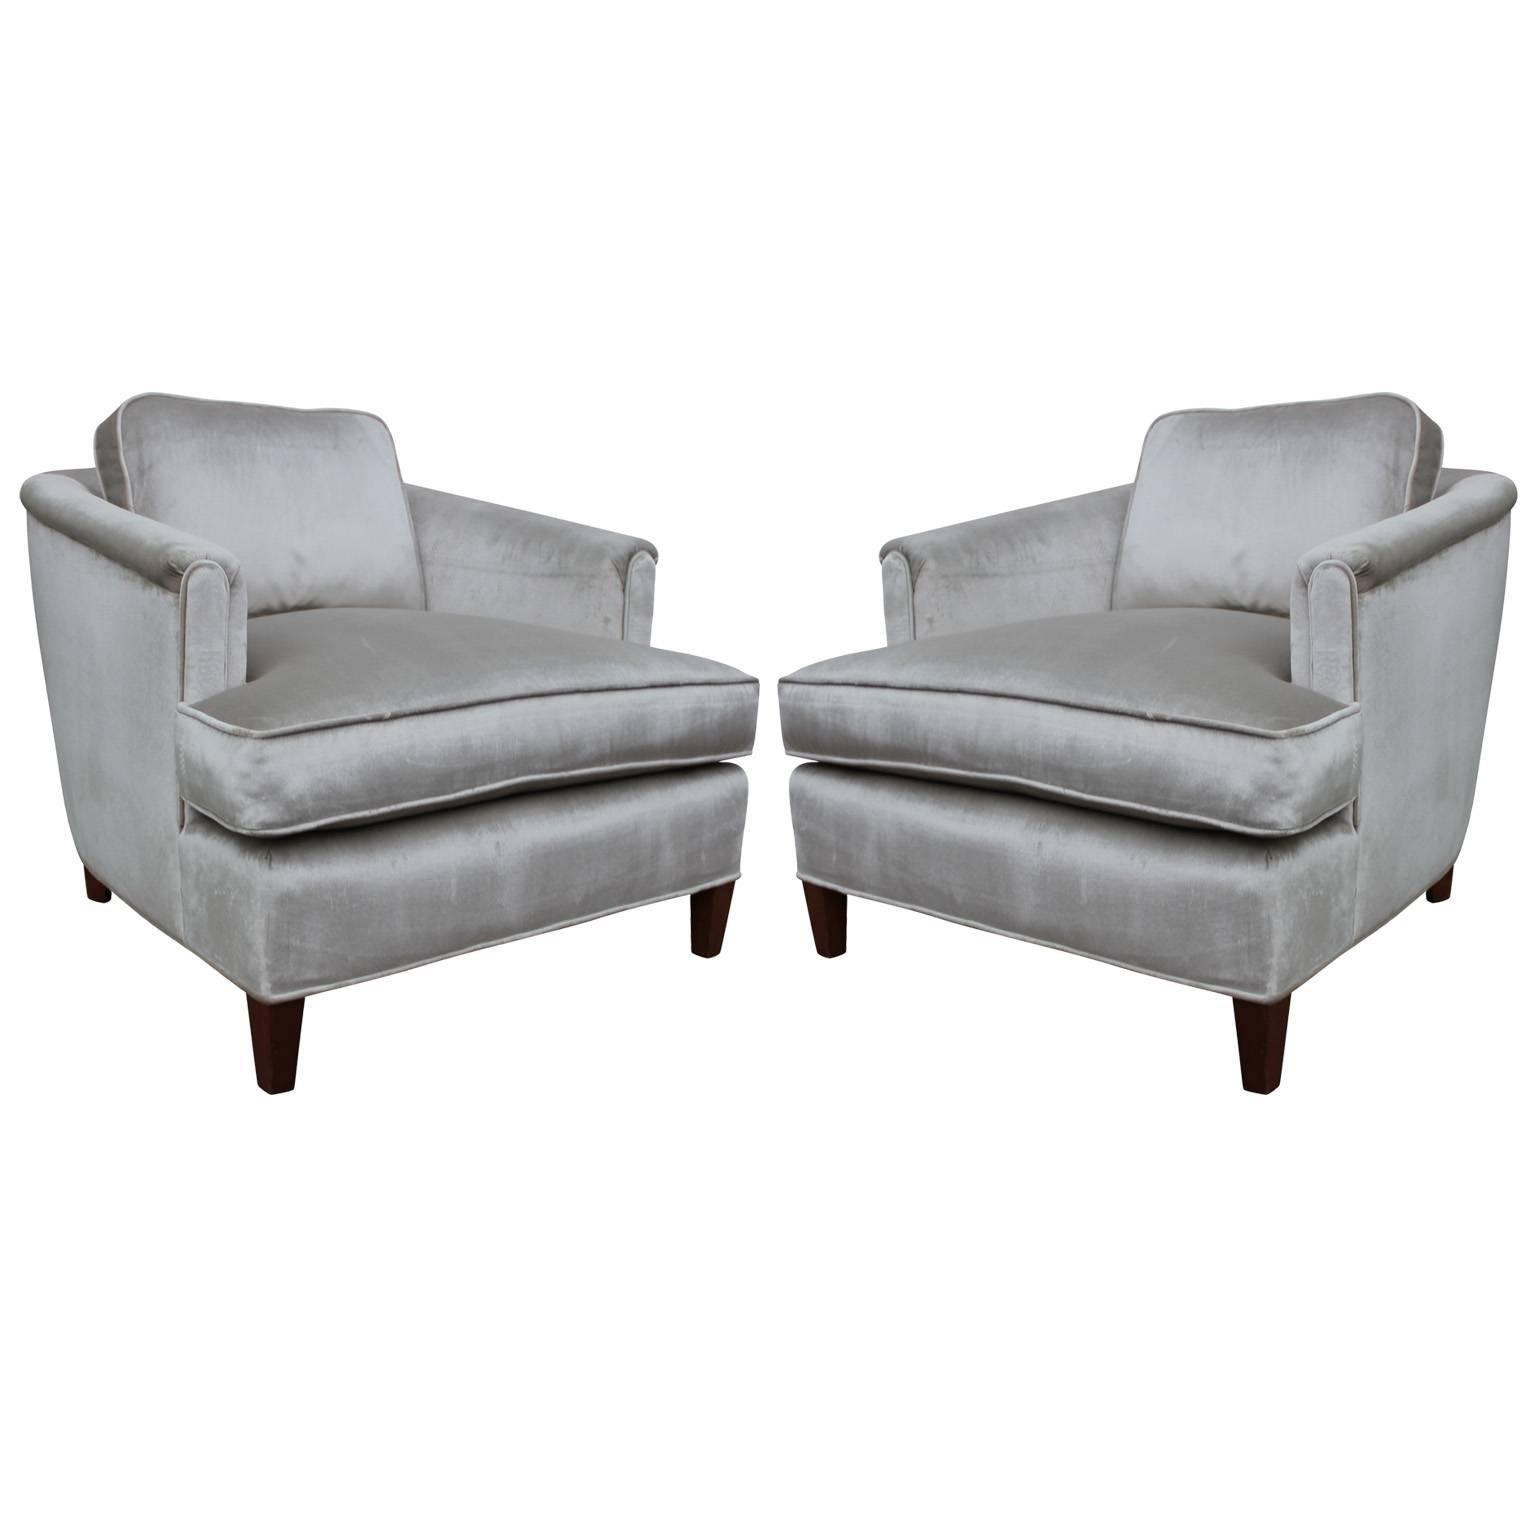 Stunning Pair of Barrel Back Lounge Chairs in Silver Grey Velvet